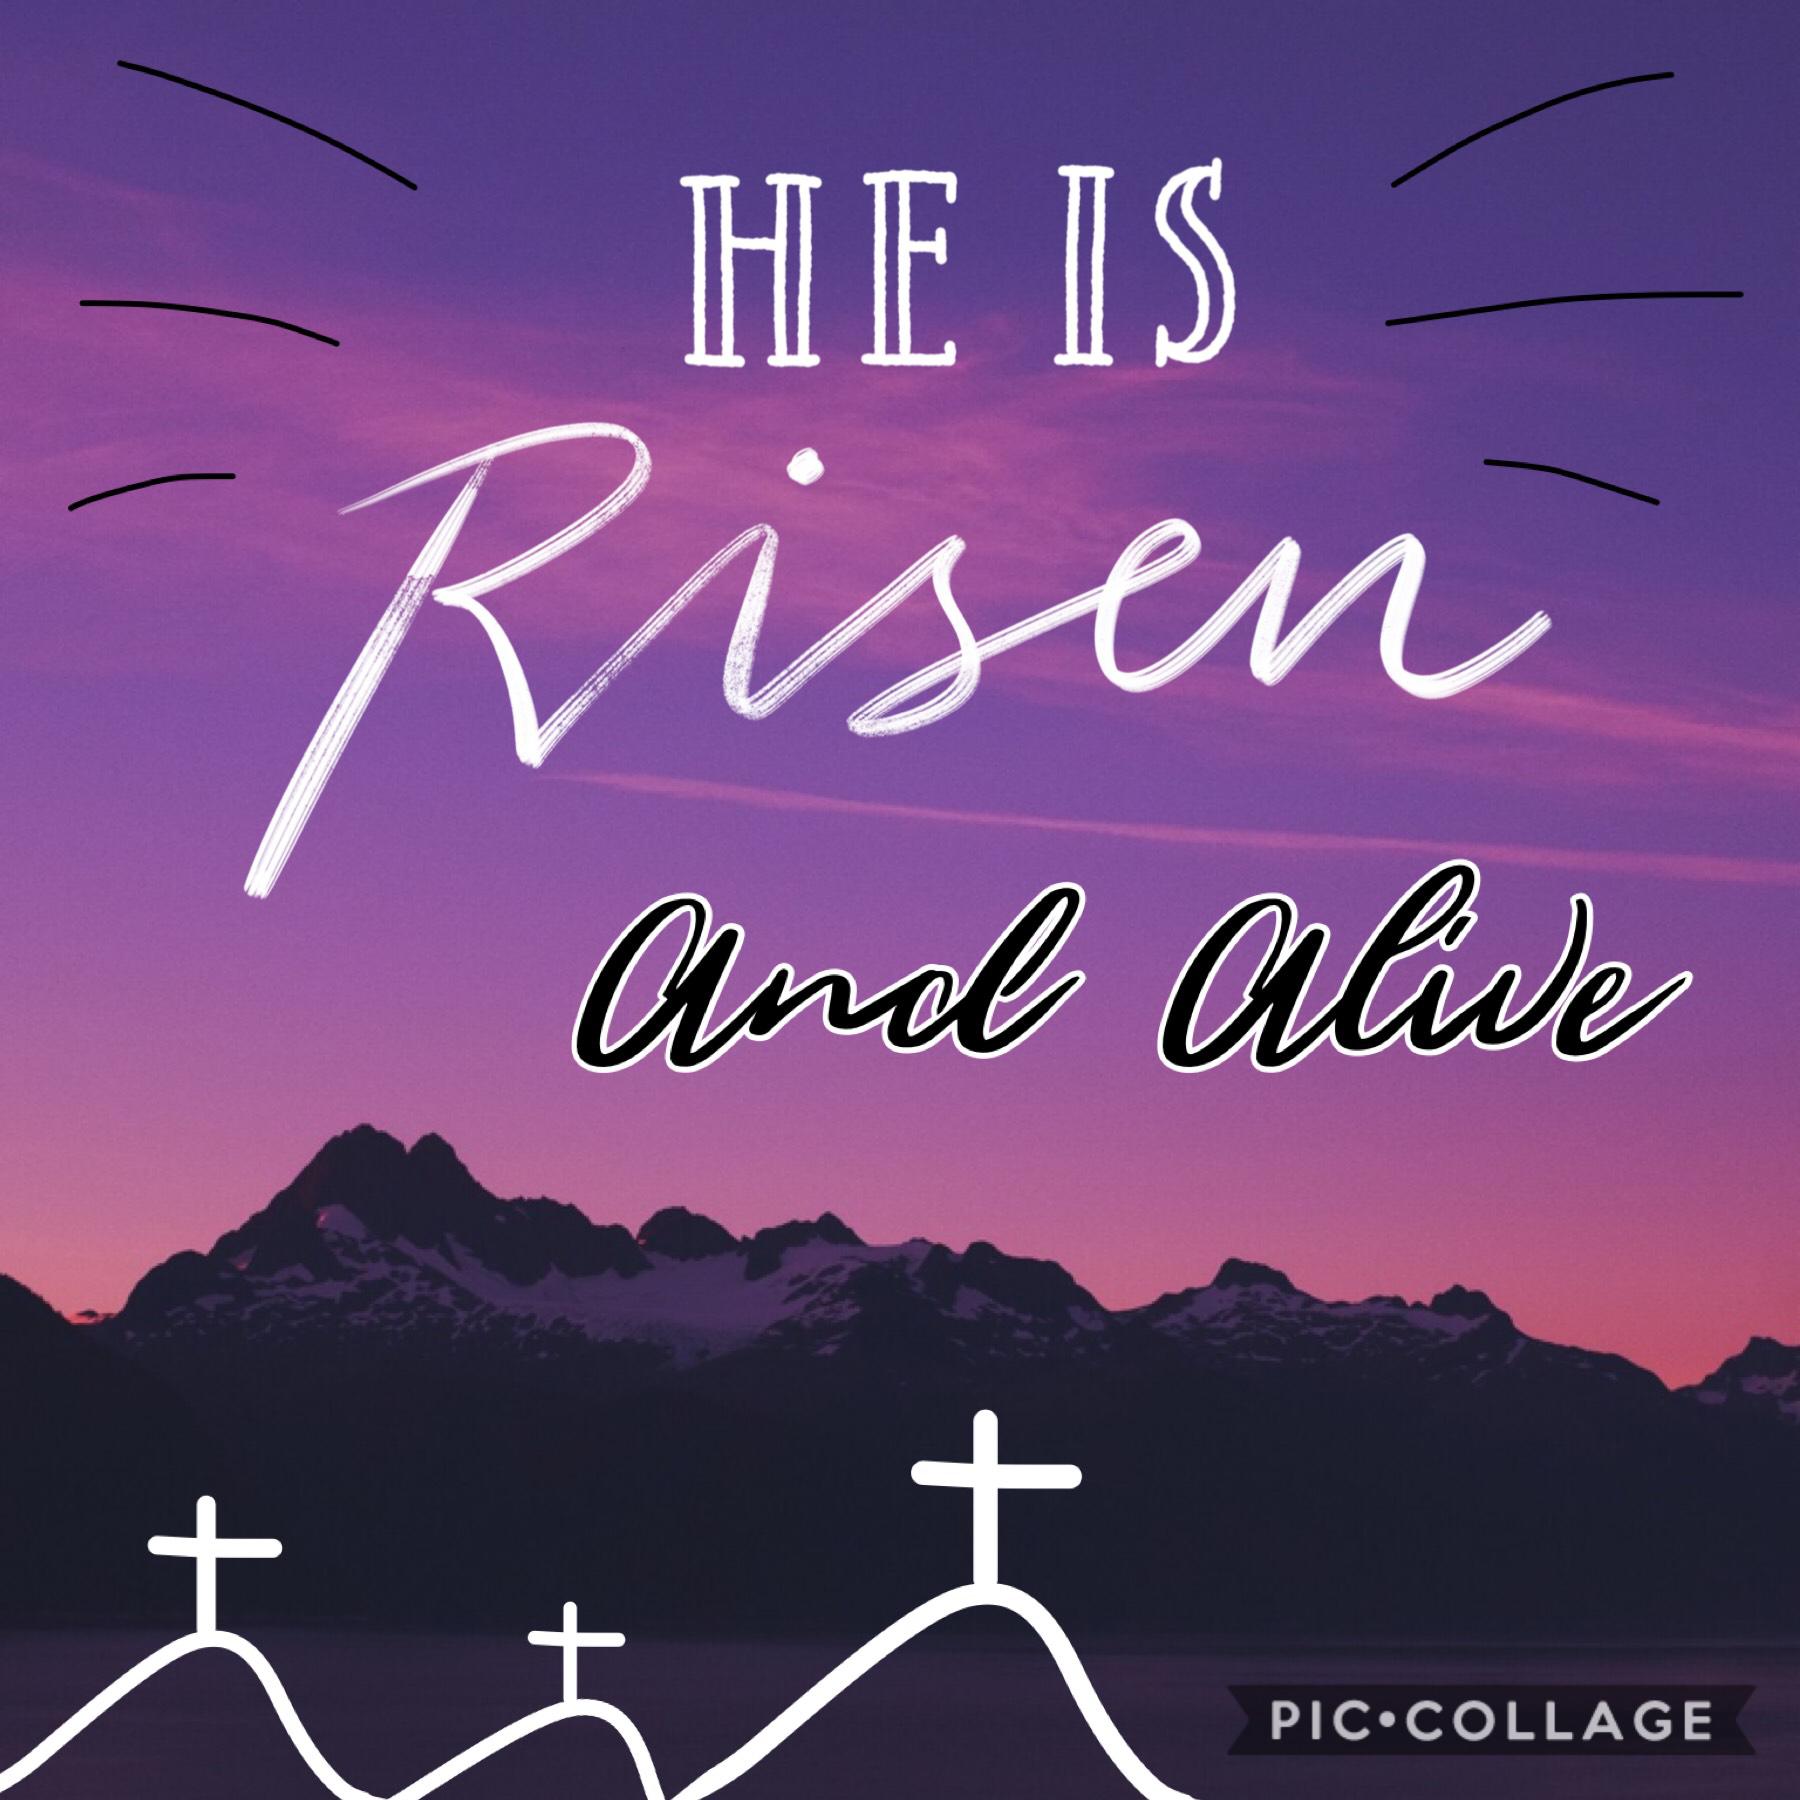 The true meaning of Easter! ☺️ ✝️ ⛰ 🖤 🙌🏻 This is super late but idc, I know I haven’t posted in like 4 weeks ( 🤯 ) but I needed a break. 💁🏻‍♀️ The Easter dessert I made is in the remixes! 🐰 🍫 🥨 Not too much has happened this month. 🗓